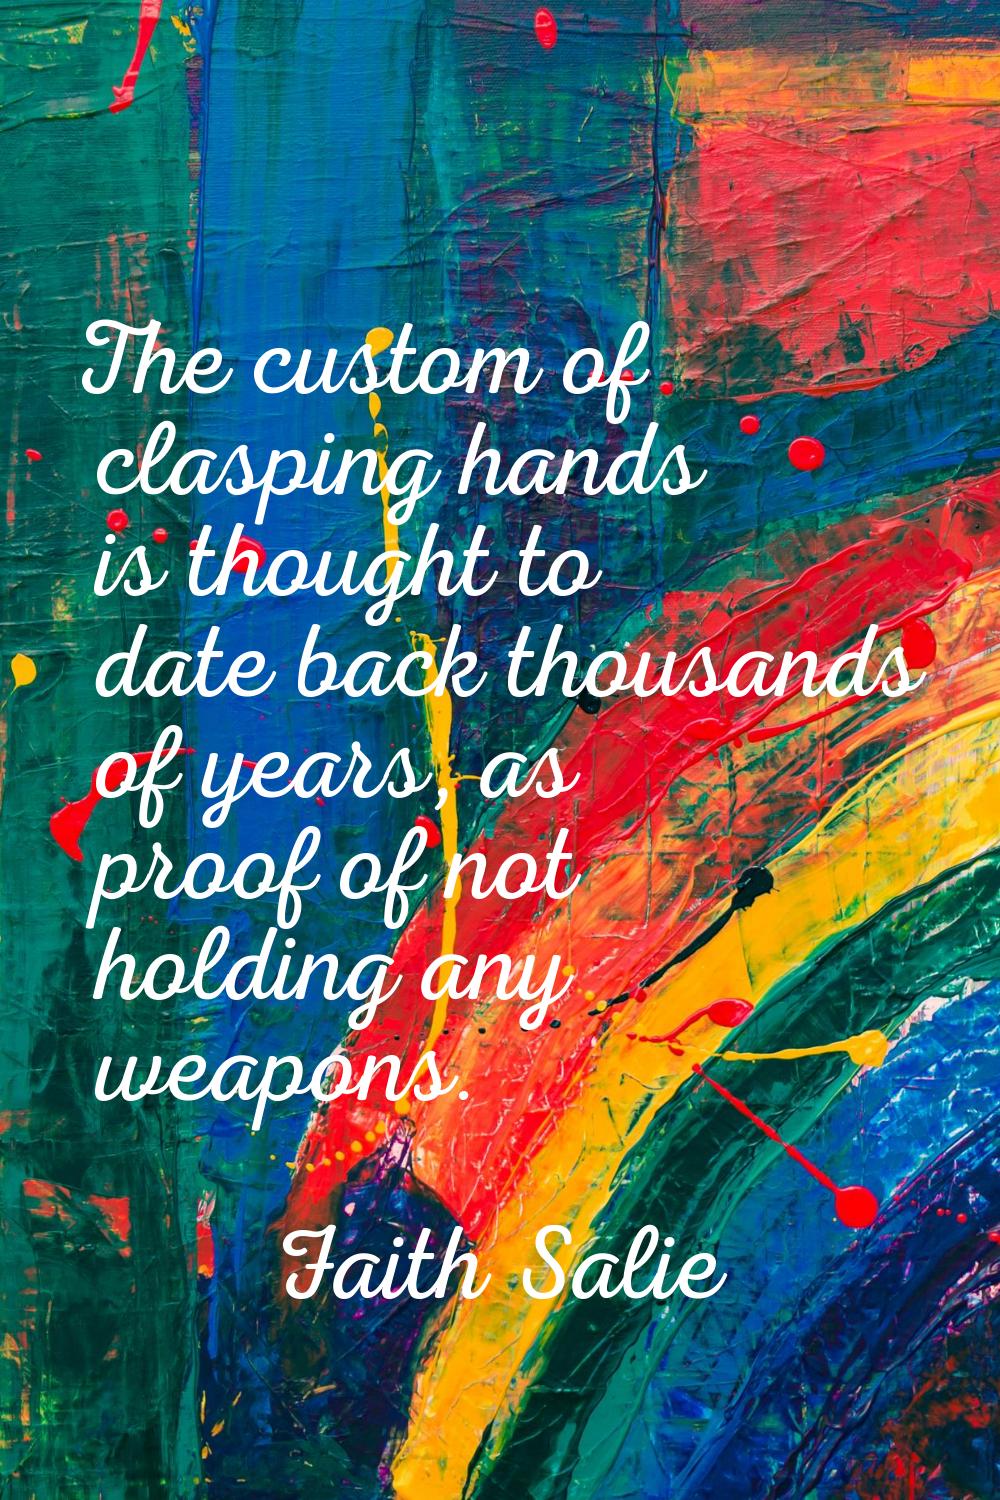 The custom of clasping hands is thought to date back thousands of years, as proof of not holding an